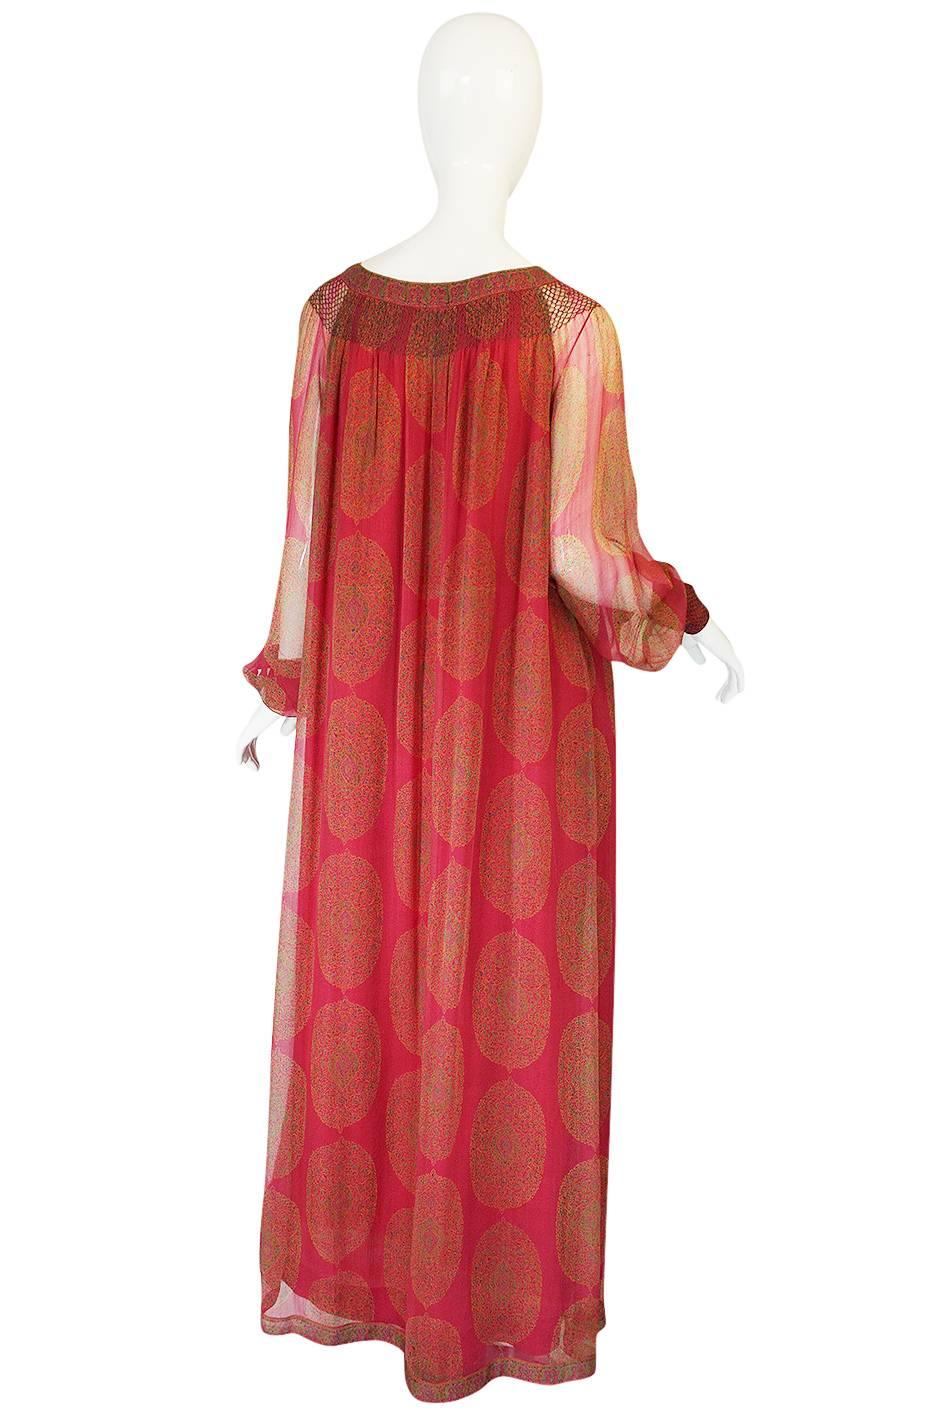 

The color of this wonderful caftan dress is fantastic - it is a deep rich pink in a brilliant jeweled hue. It is cut with a gathered and ruched neckline and upper bodice where the fabric has been gathered with tiny cross stitched thatch work for